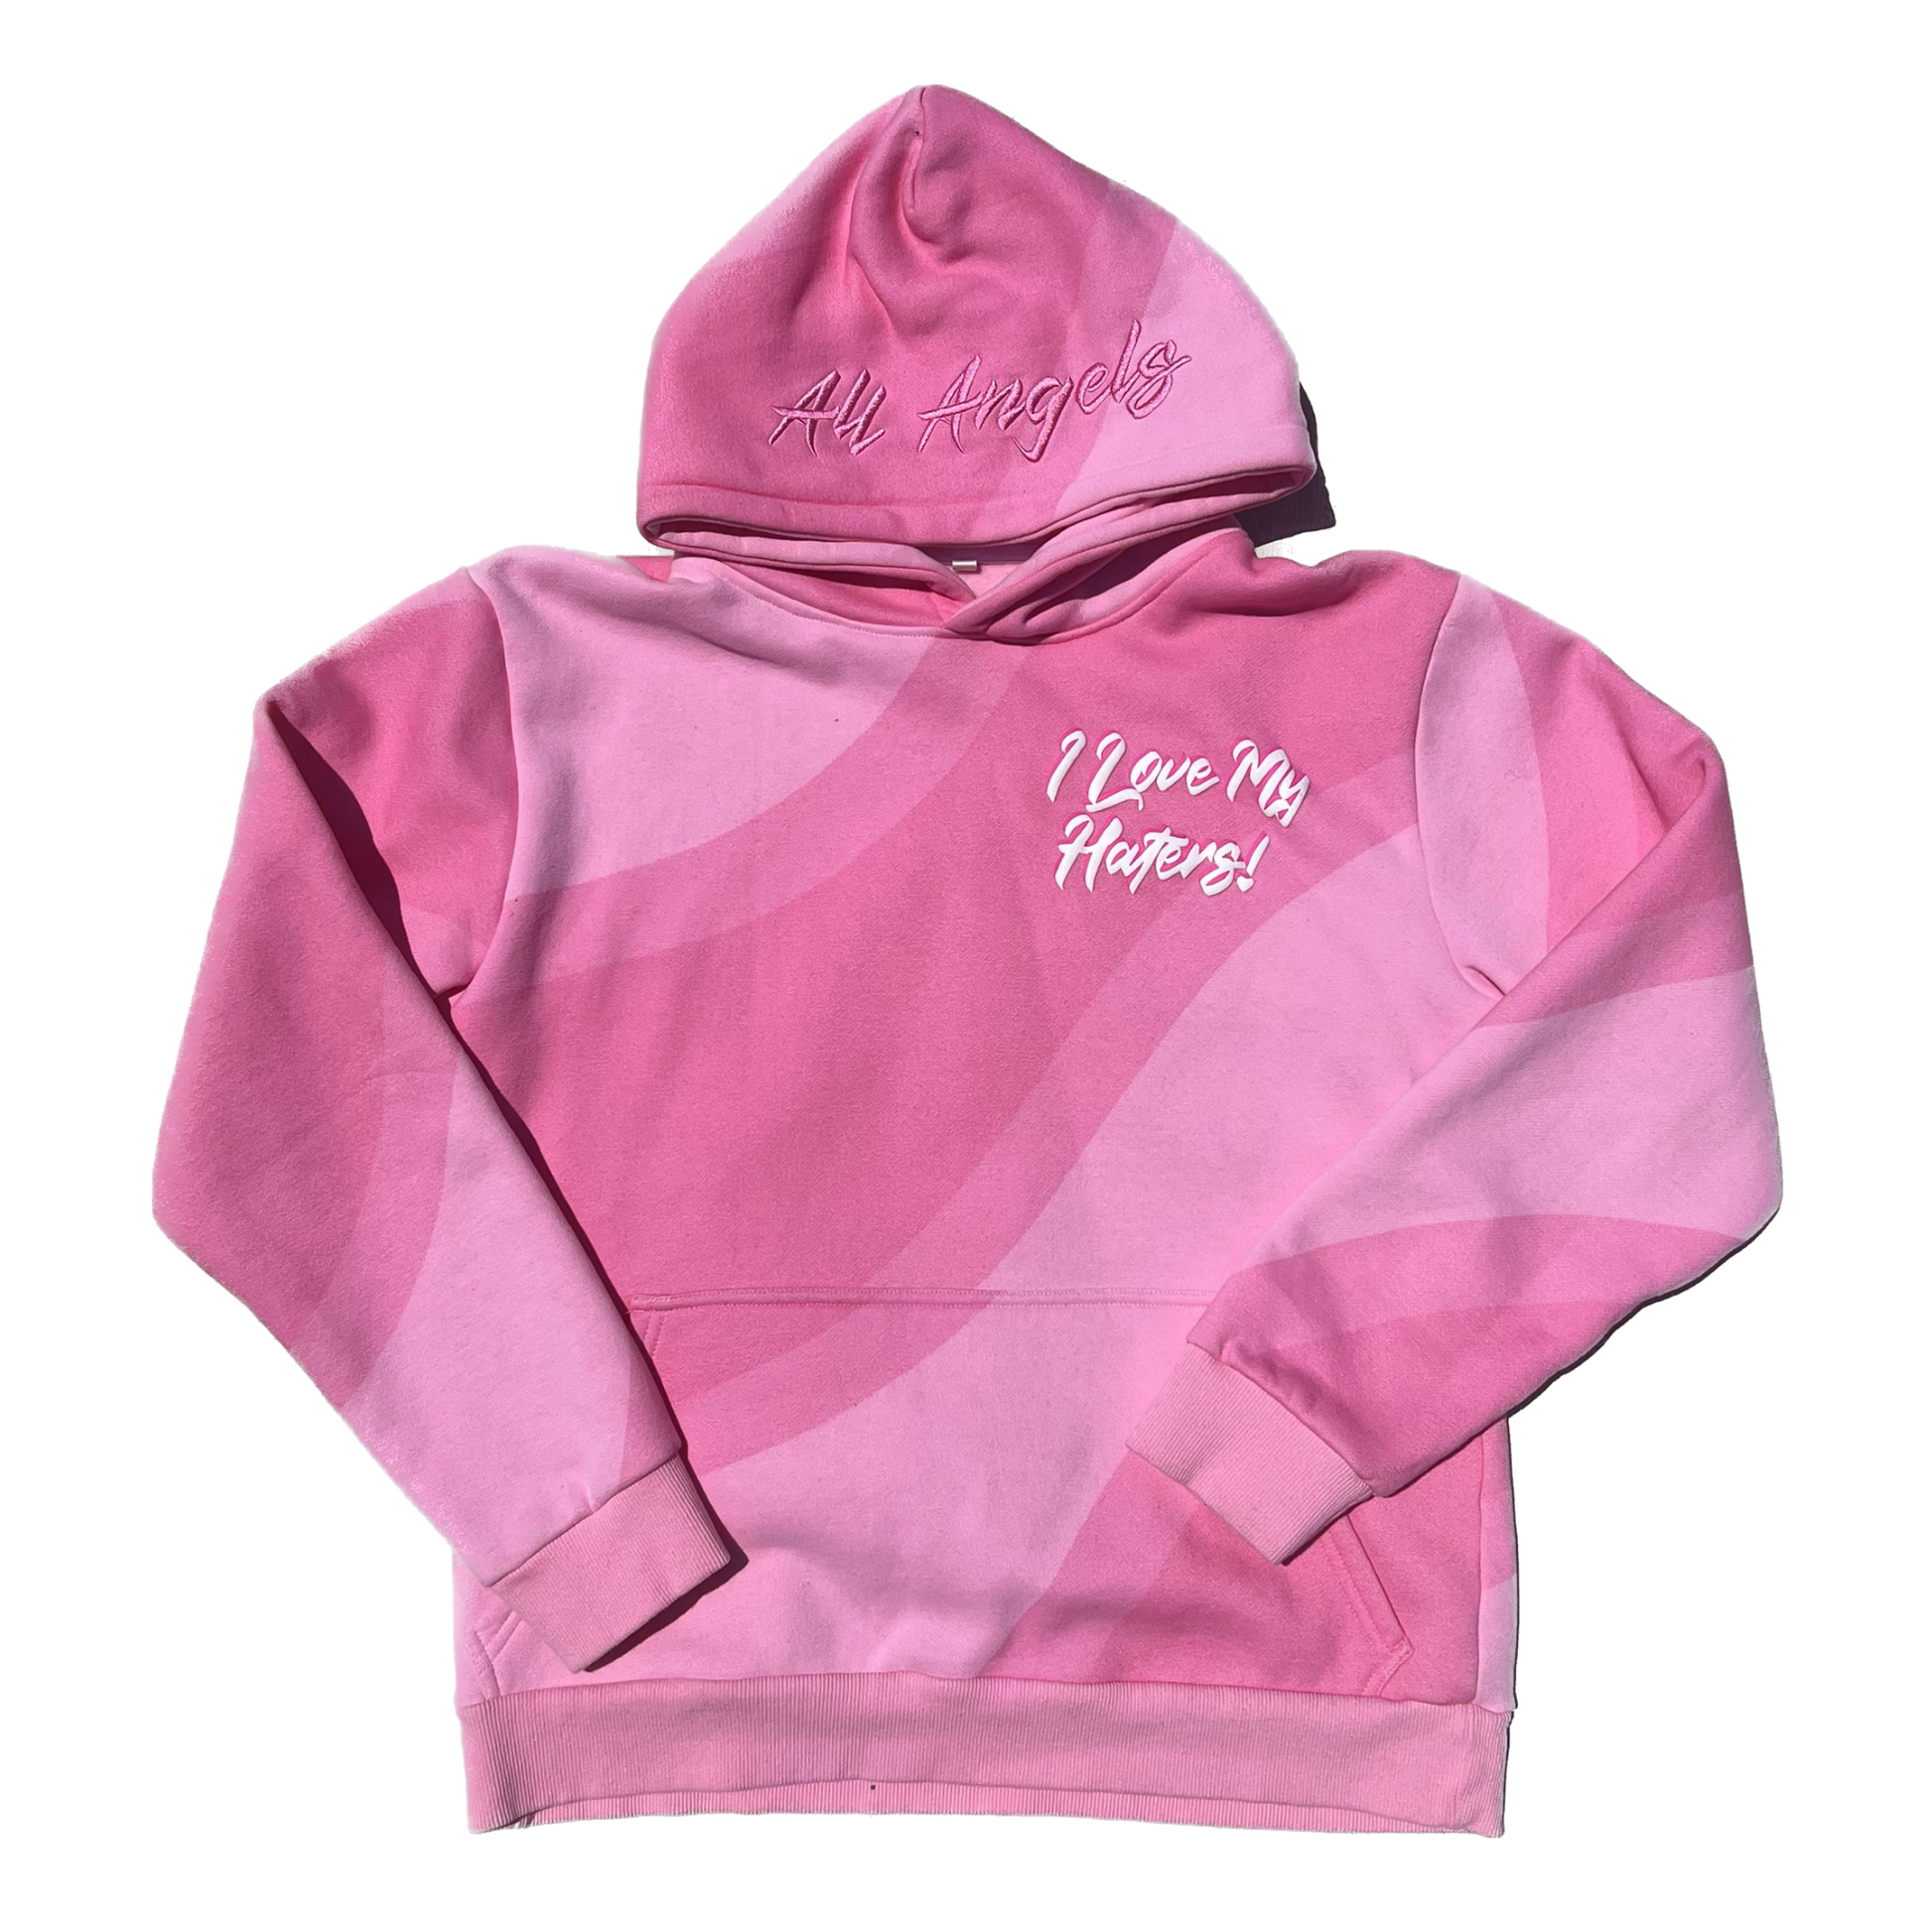 Love My Haters Hoodie, Pink – All Angels Clothing